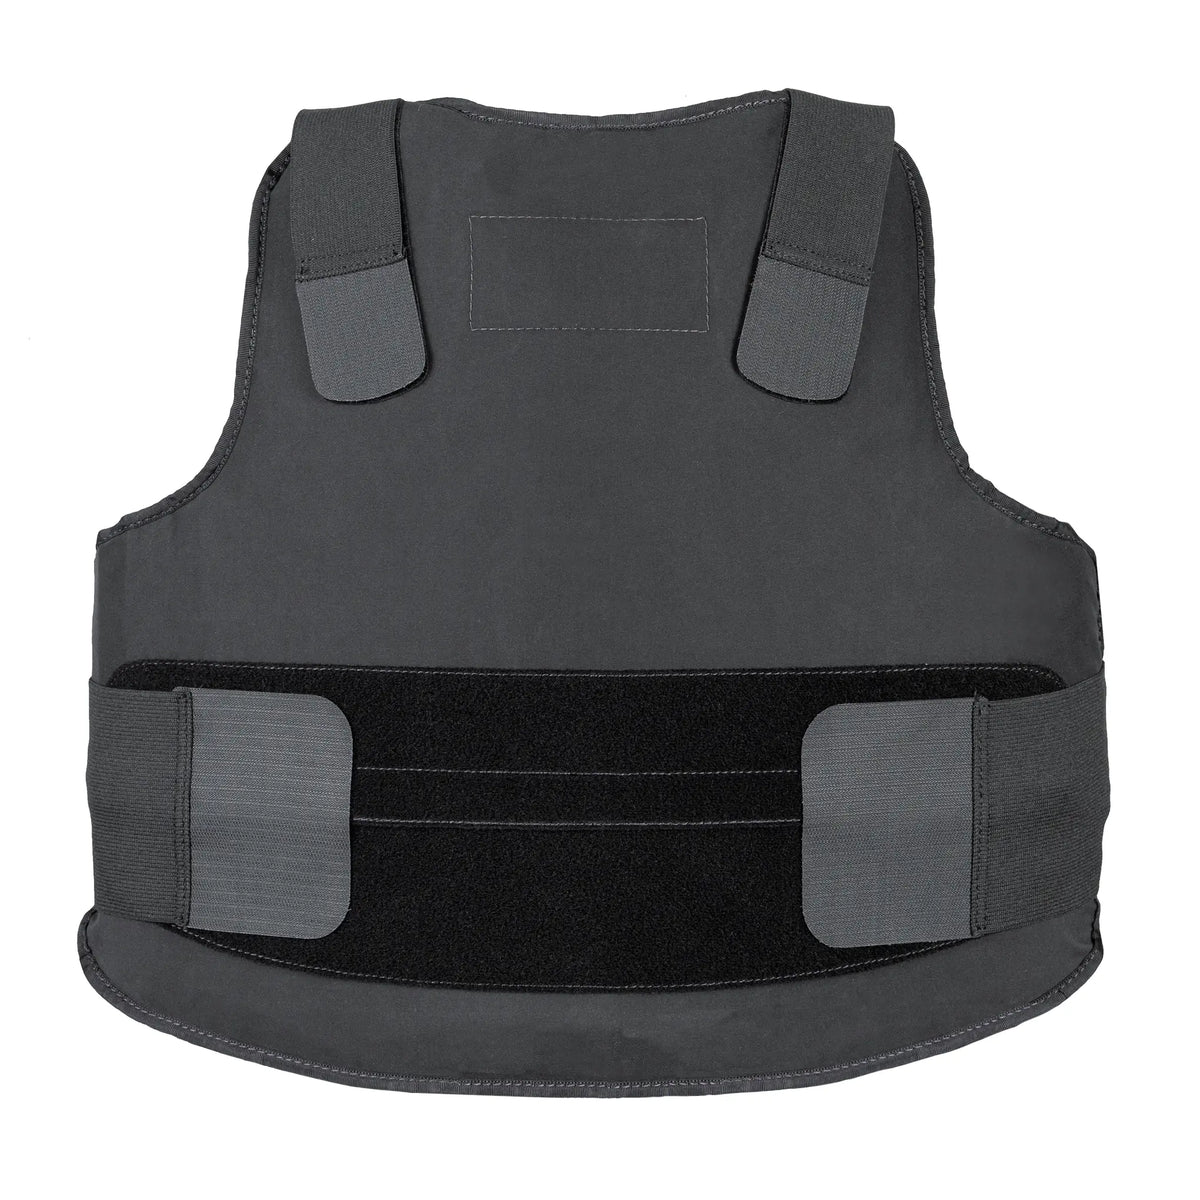 Concealable Carrier